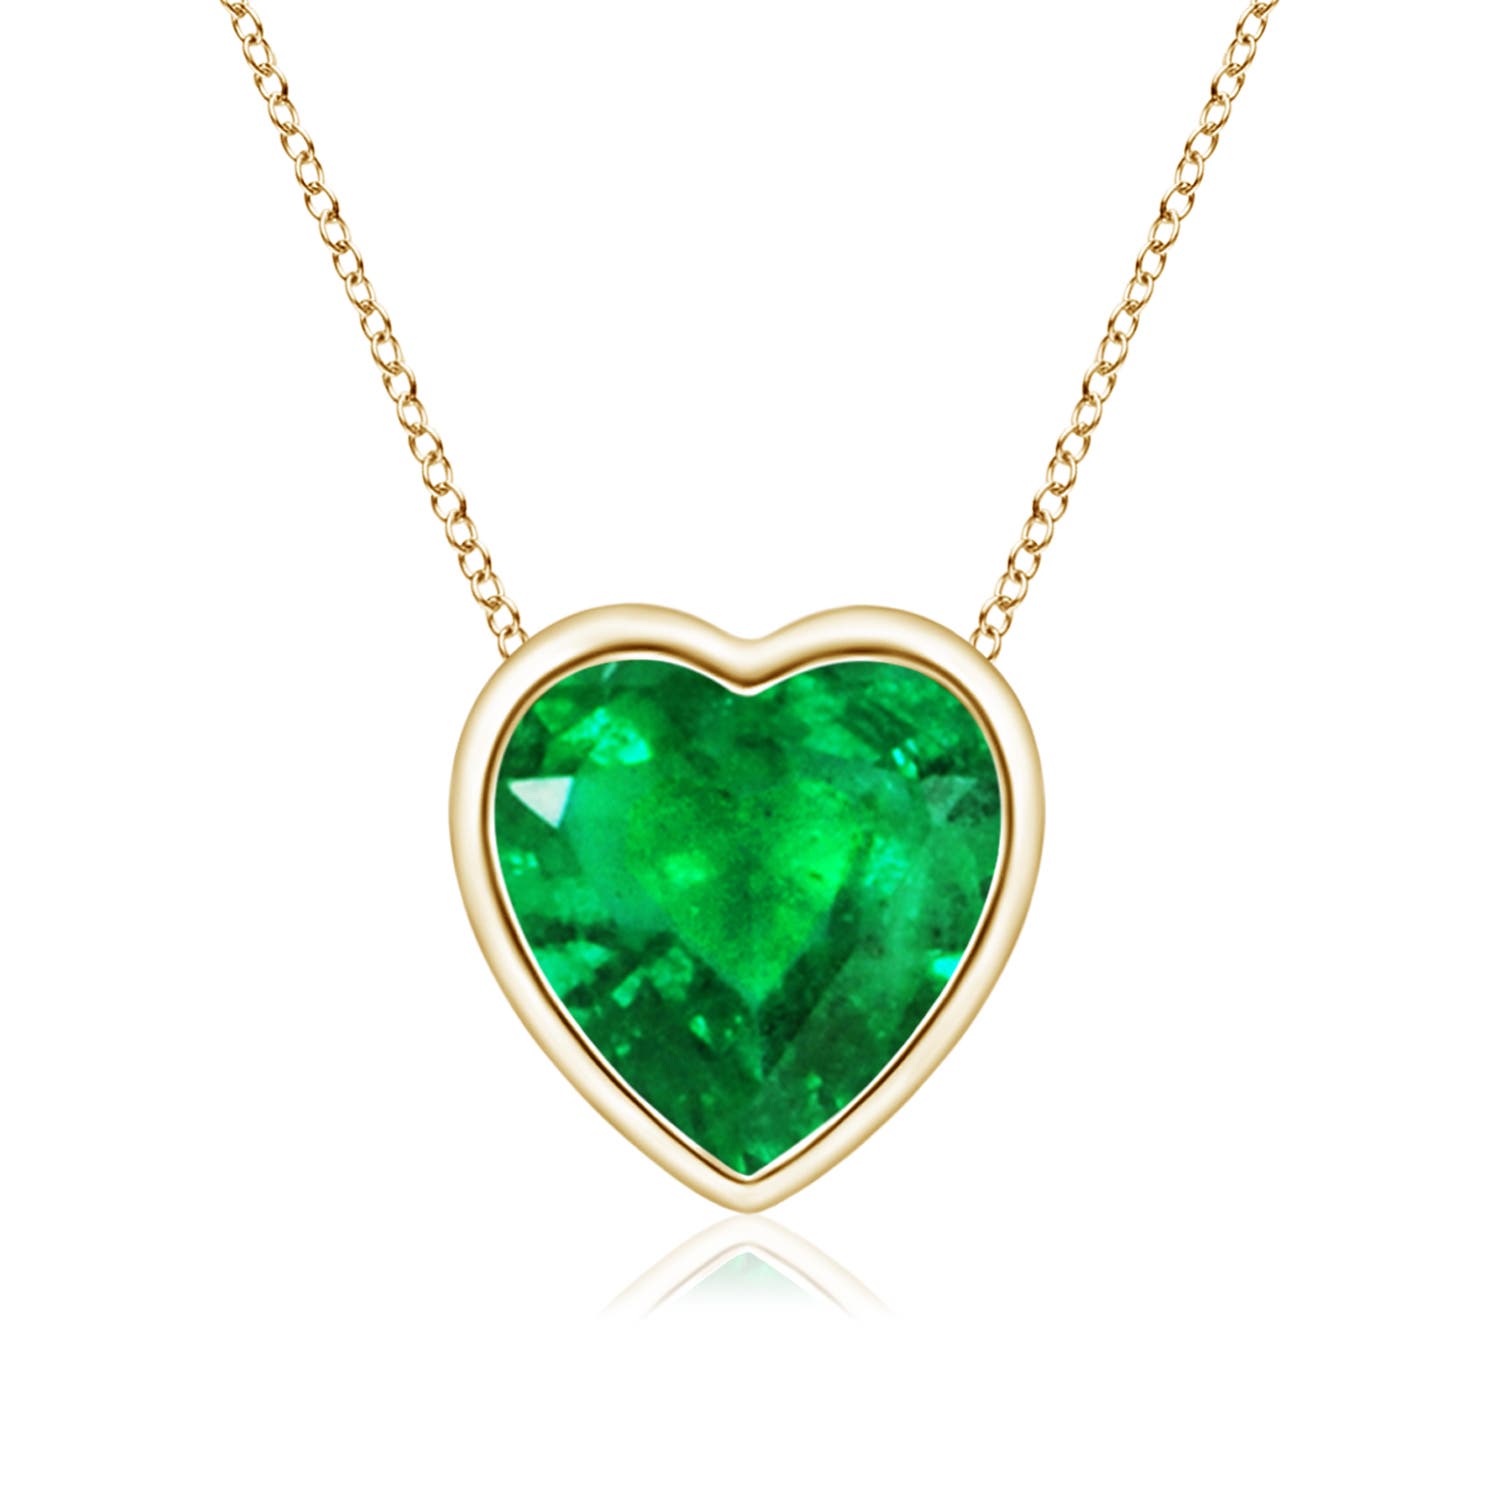 AAA - Emerald / 0.6 CT / 14 KT Yellow Gold